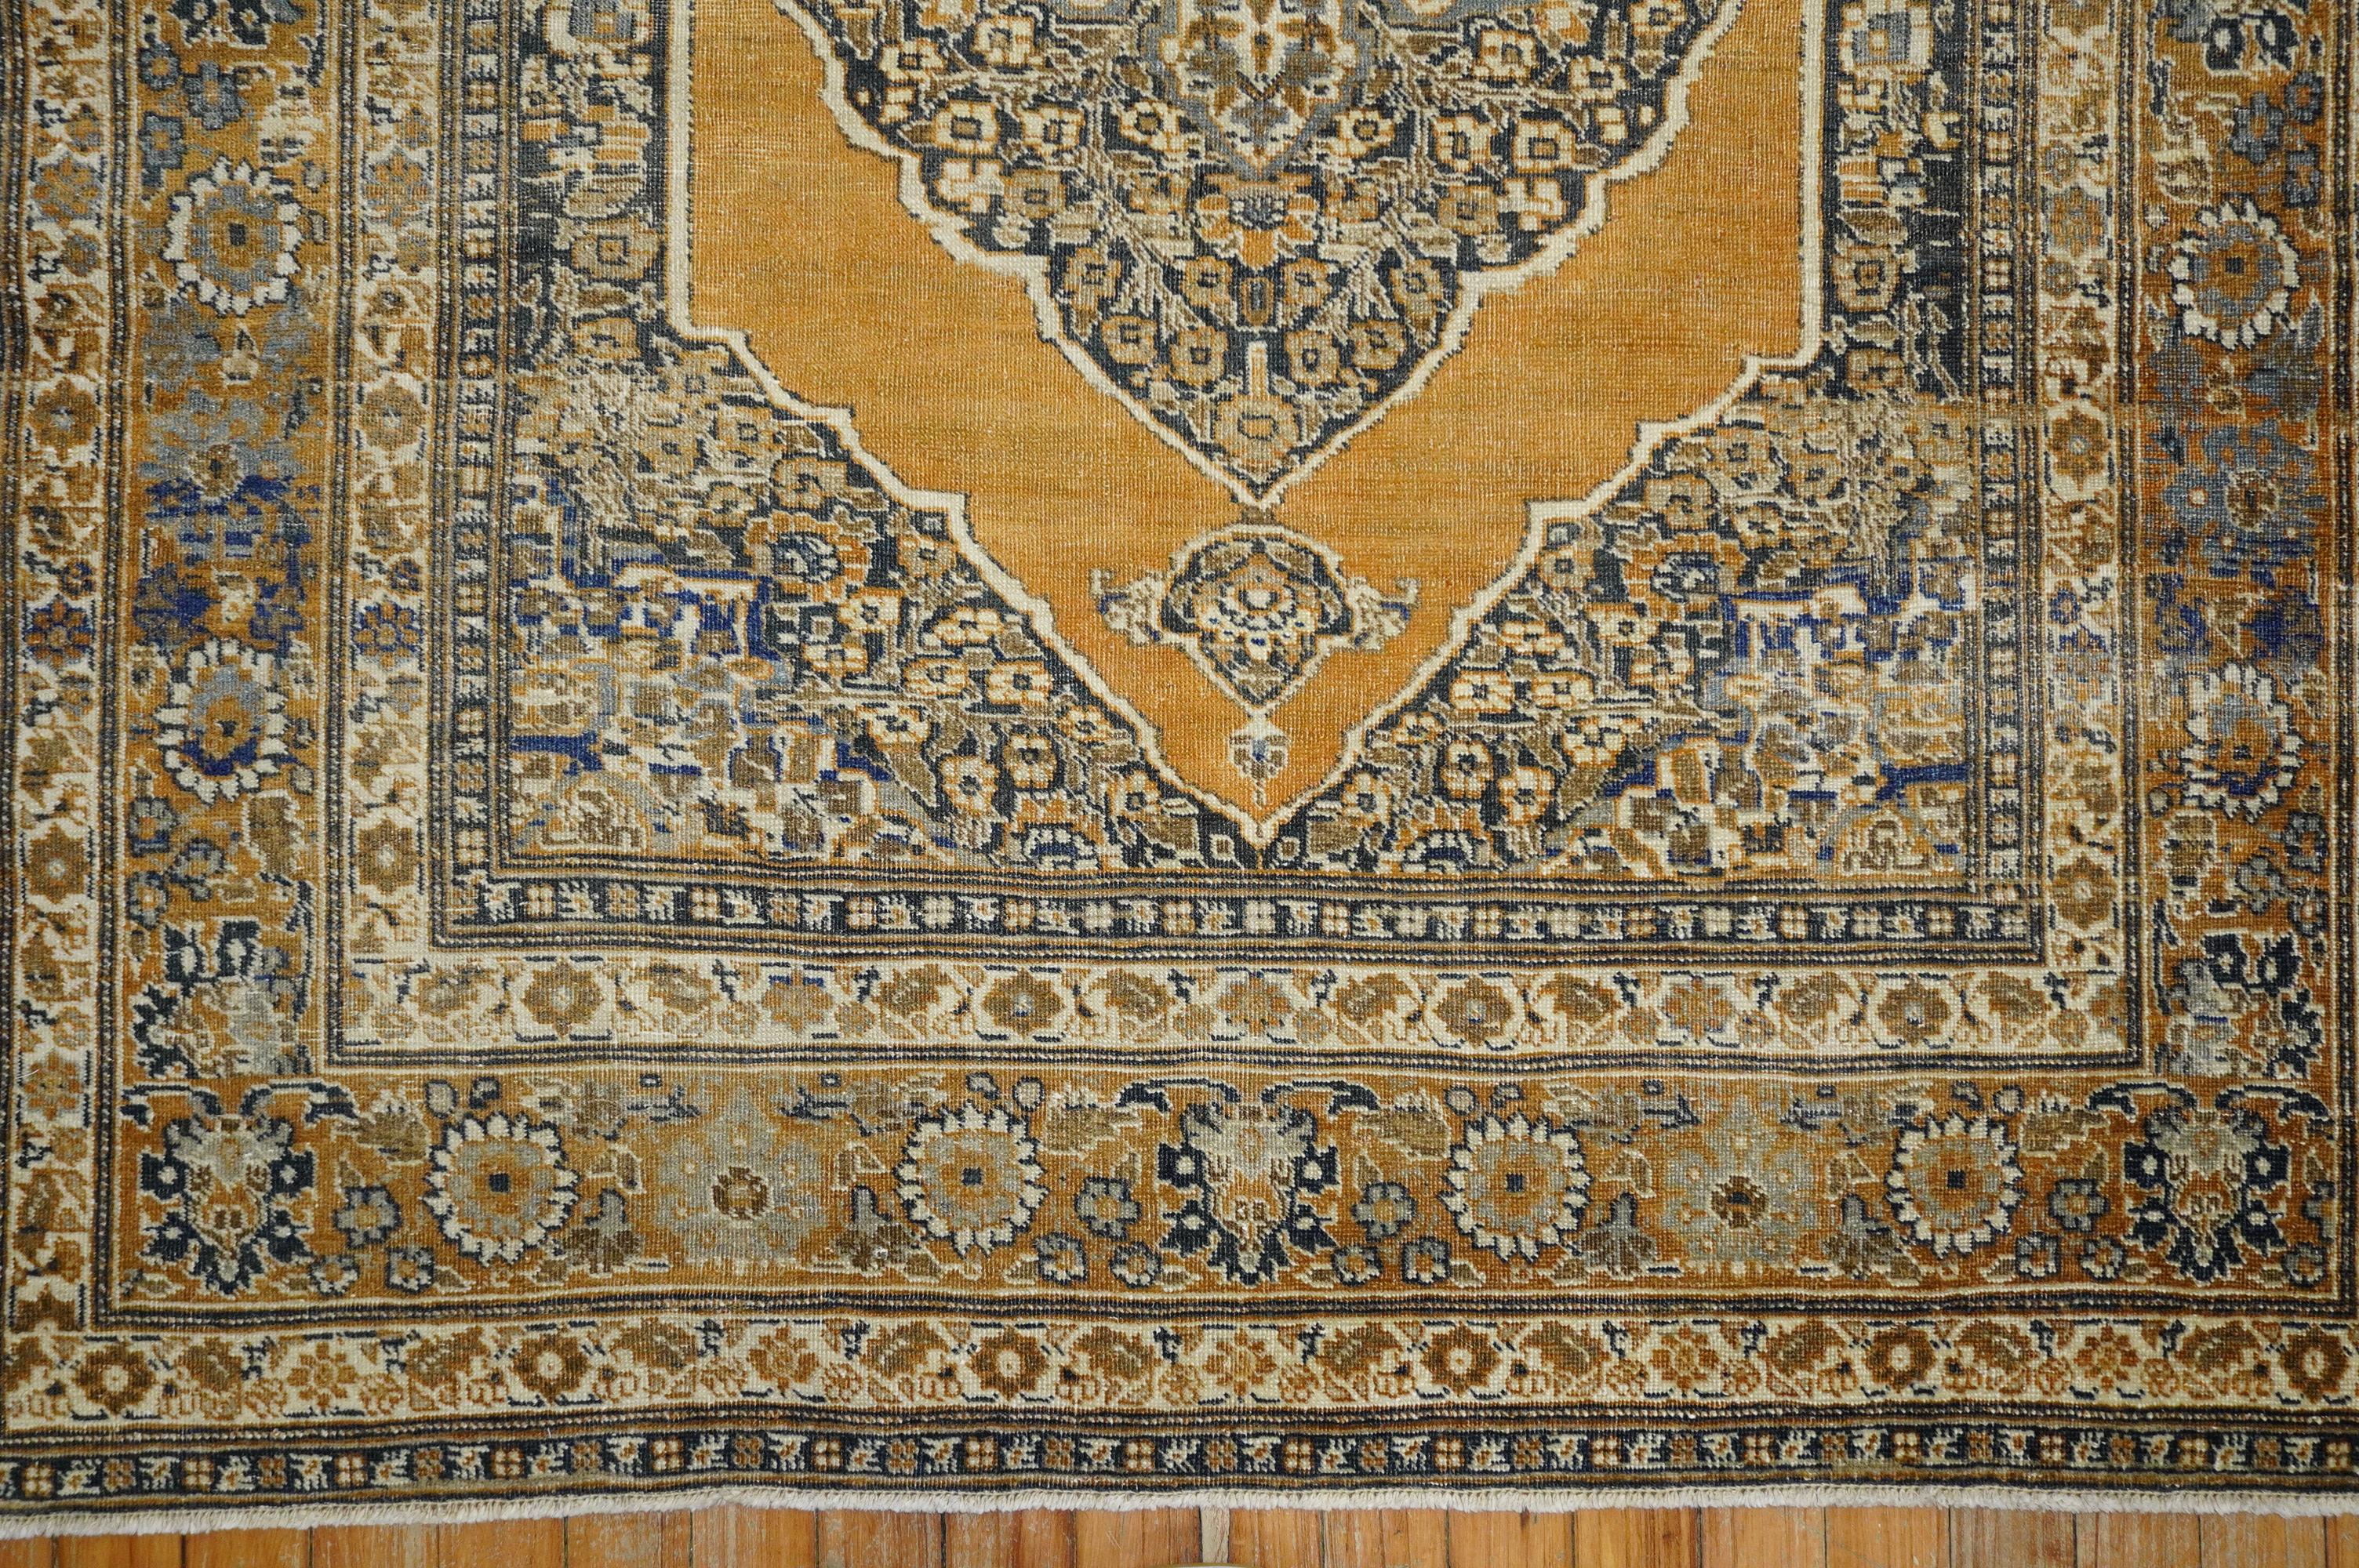 Hand-Woven Gold Charcoal Antique Persian Tabriz Rug, Early 20th Century For Sale